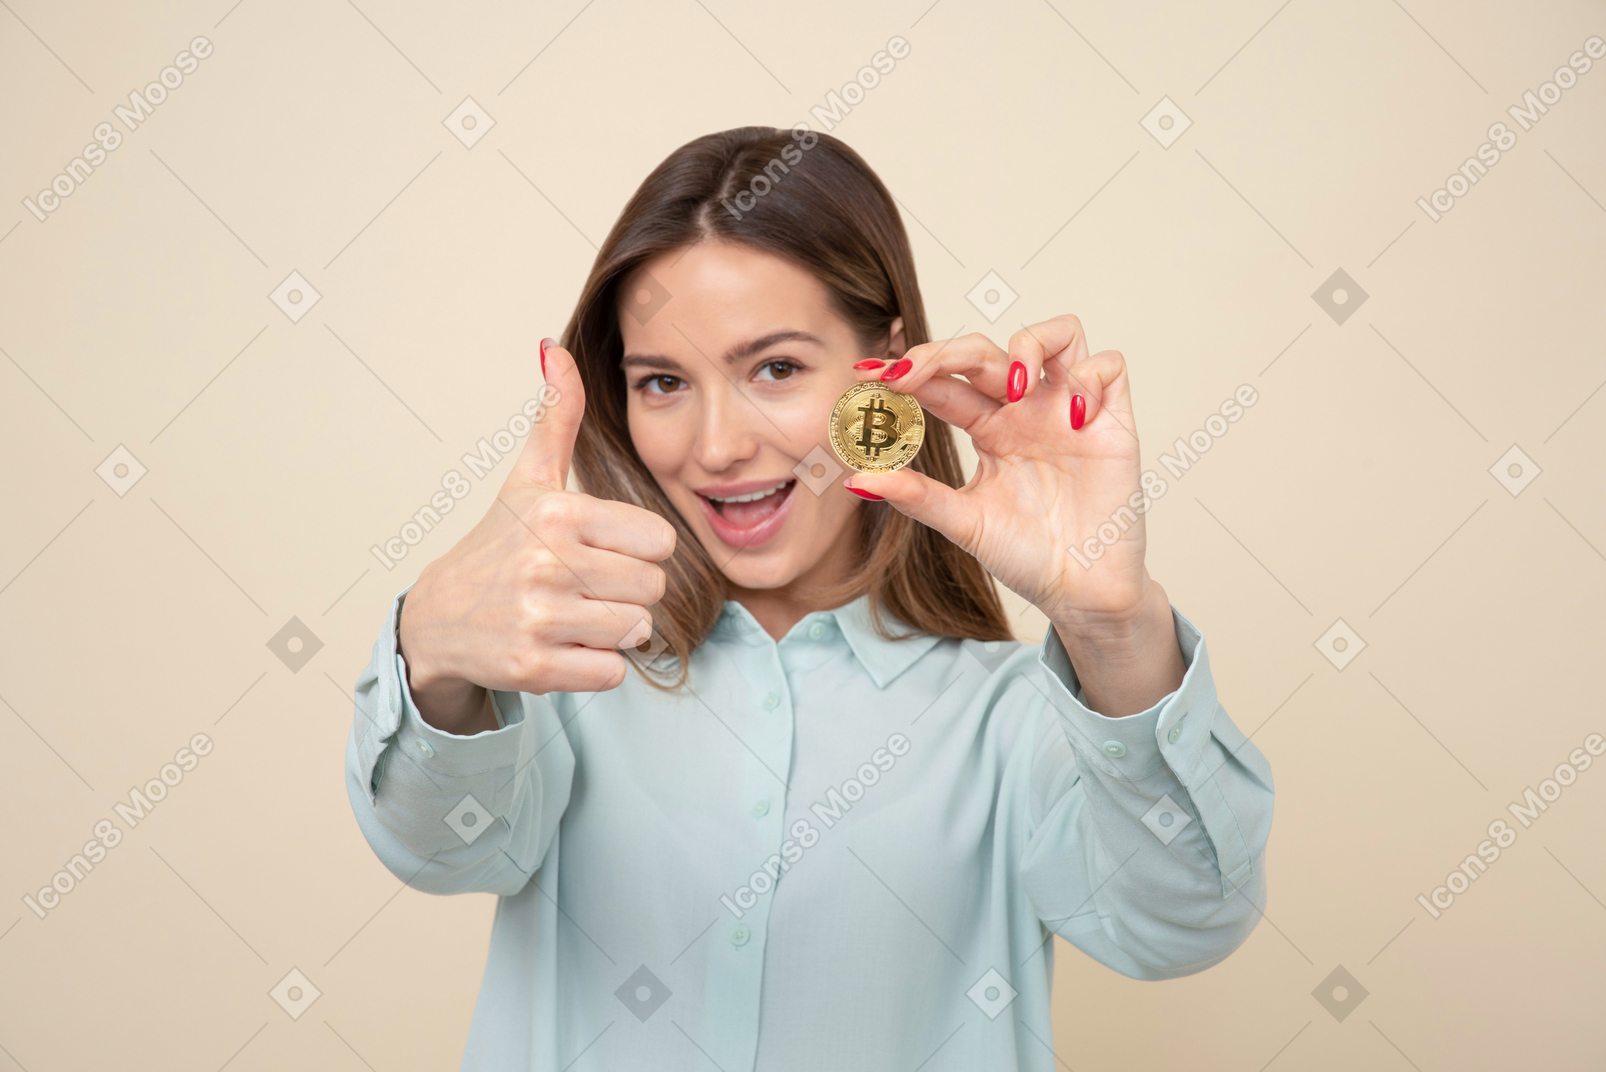 Attractive young girl showing a bitcoin and thumbs up